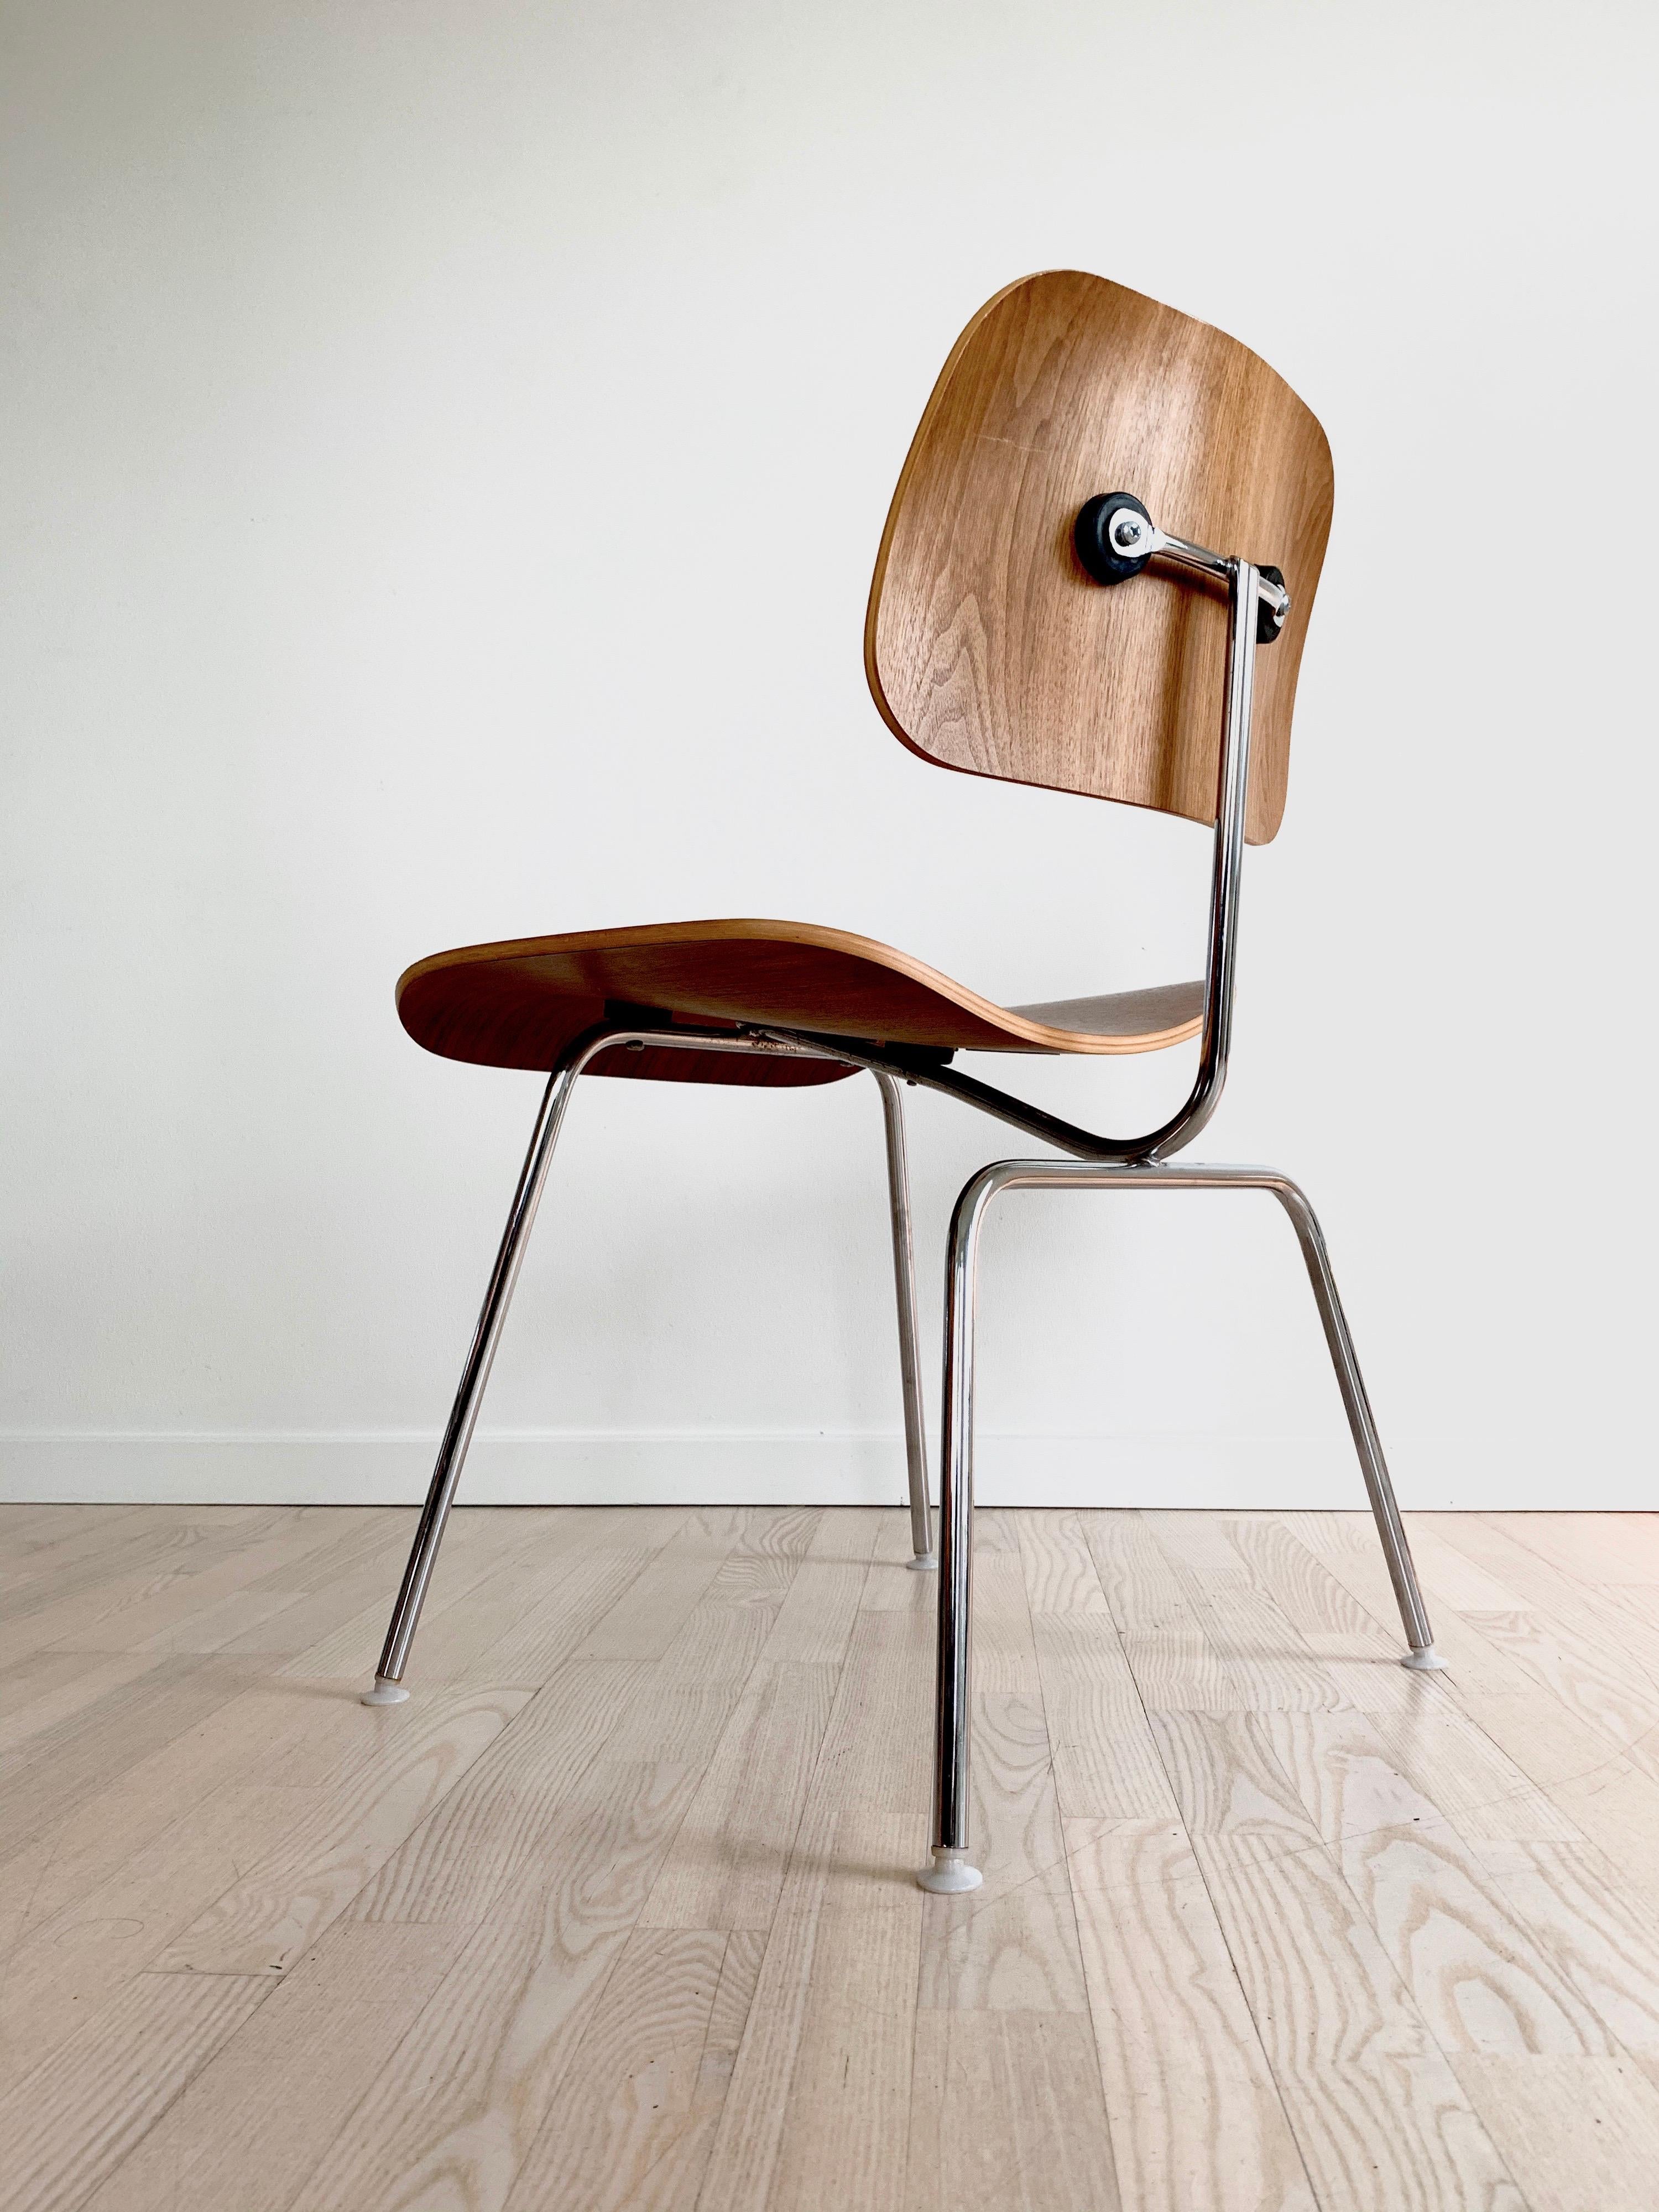 Charles Eames DCM Wallnut Chair by Herman Miller In Distressed Condition For Sale In Copenhagen, DK